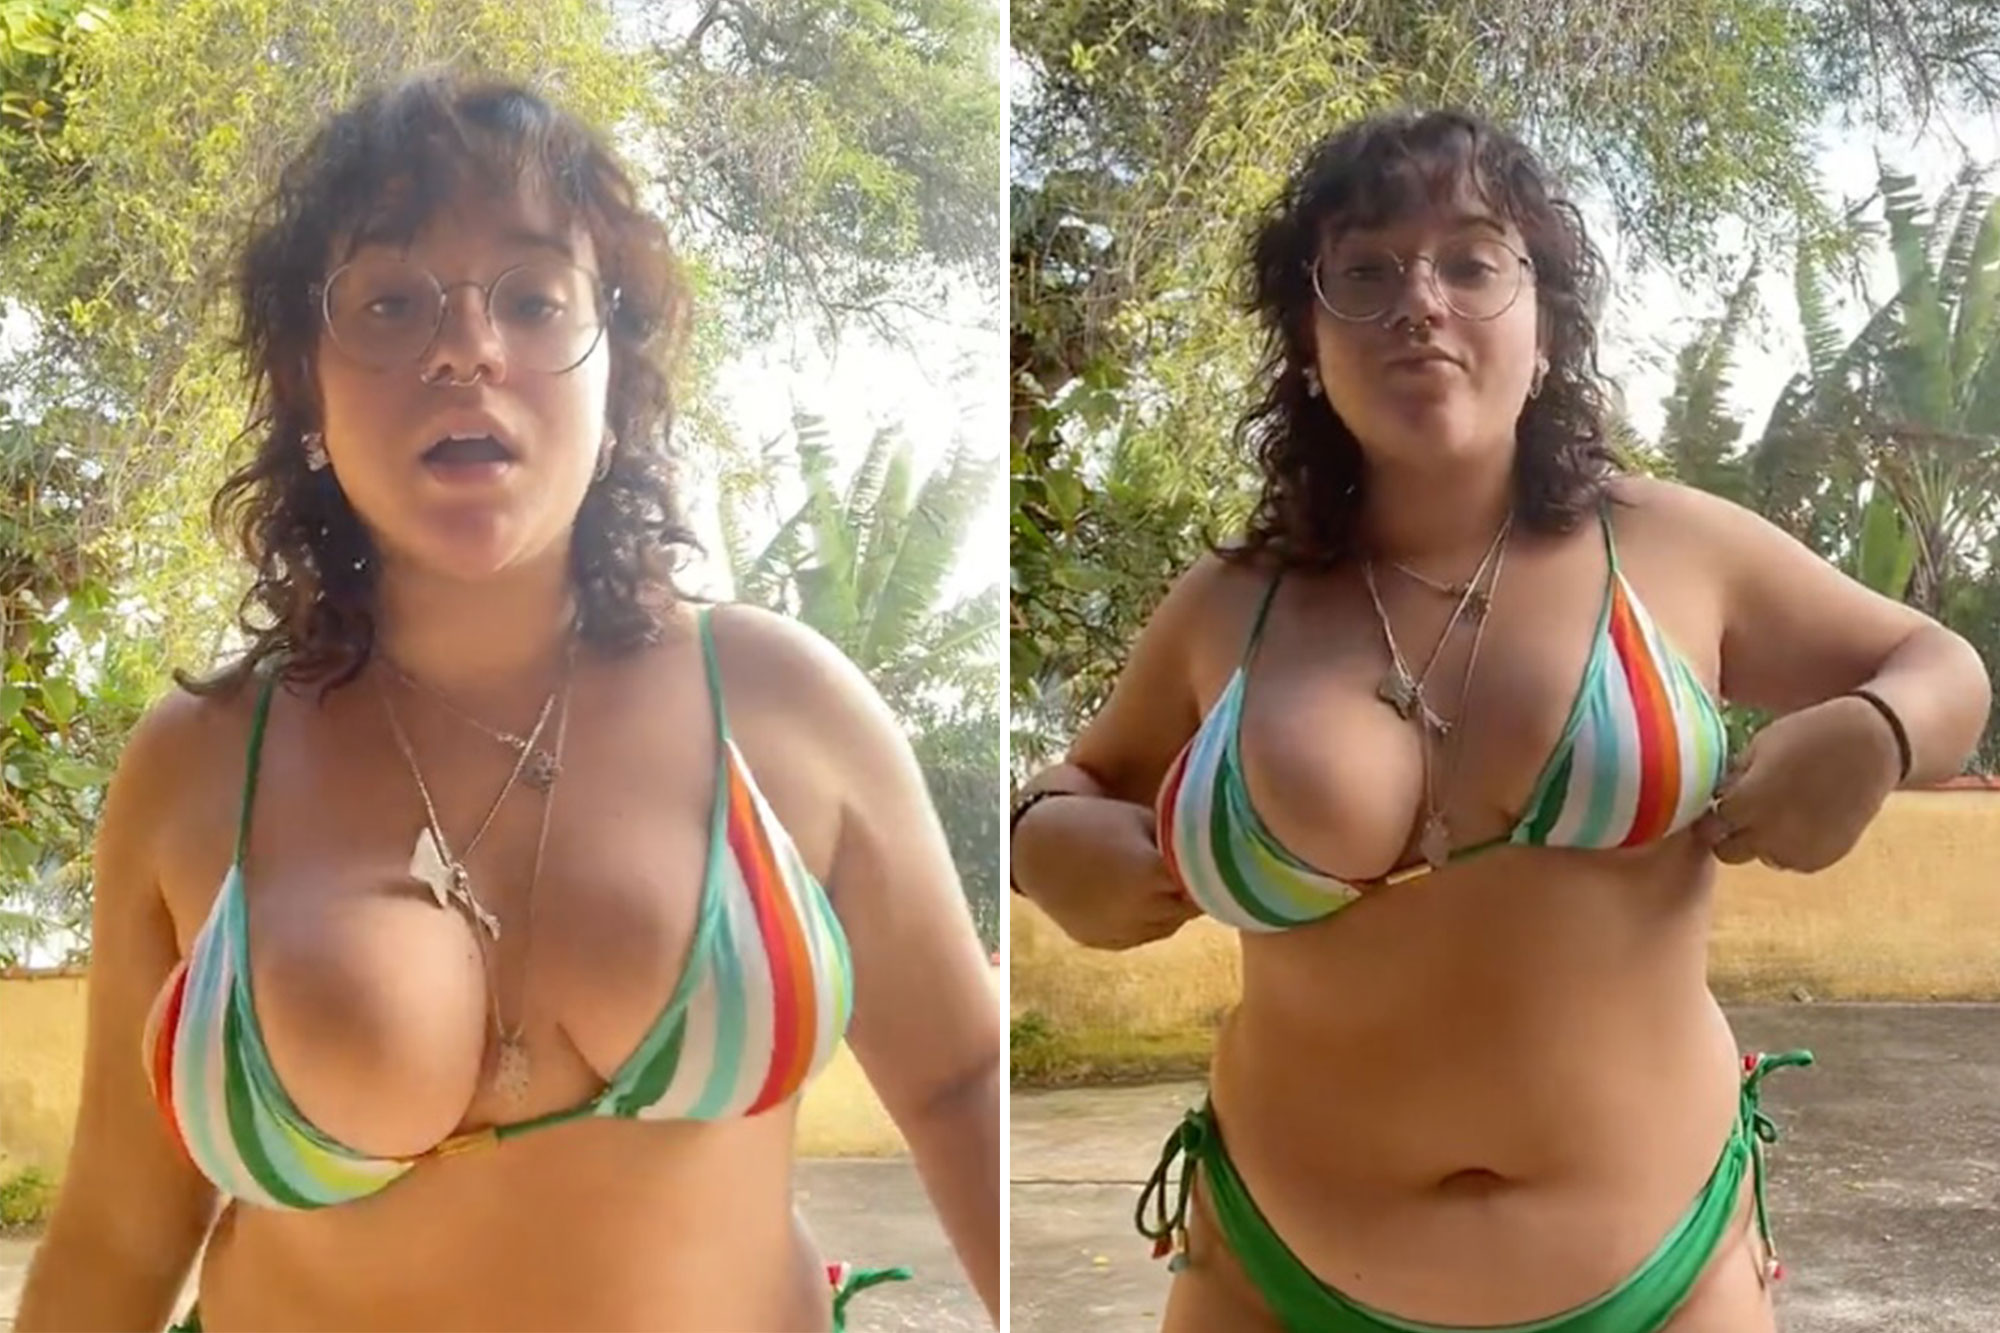 crystal tapia recommends Girls Showing Off Their Breasts